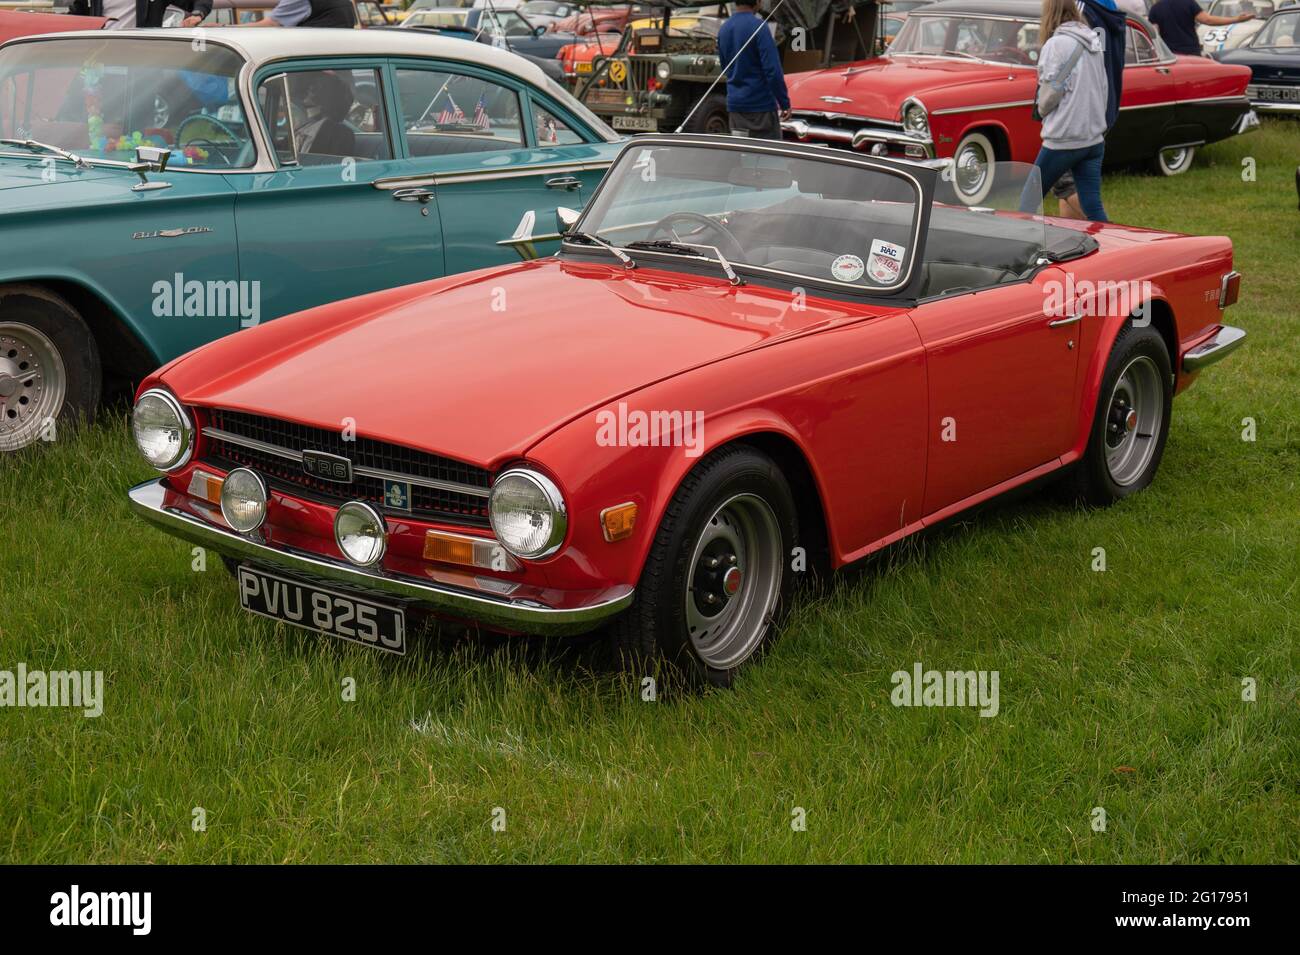 Triumph TR6 in red with spot lights with its roof down at a classic car show Stock Photo